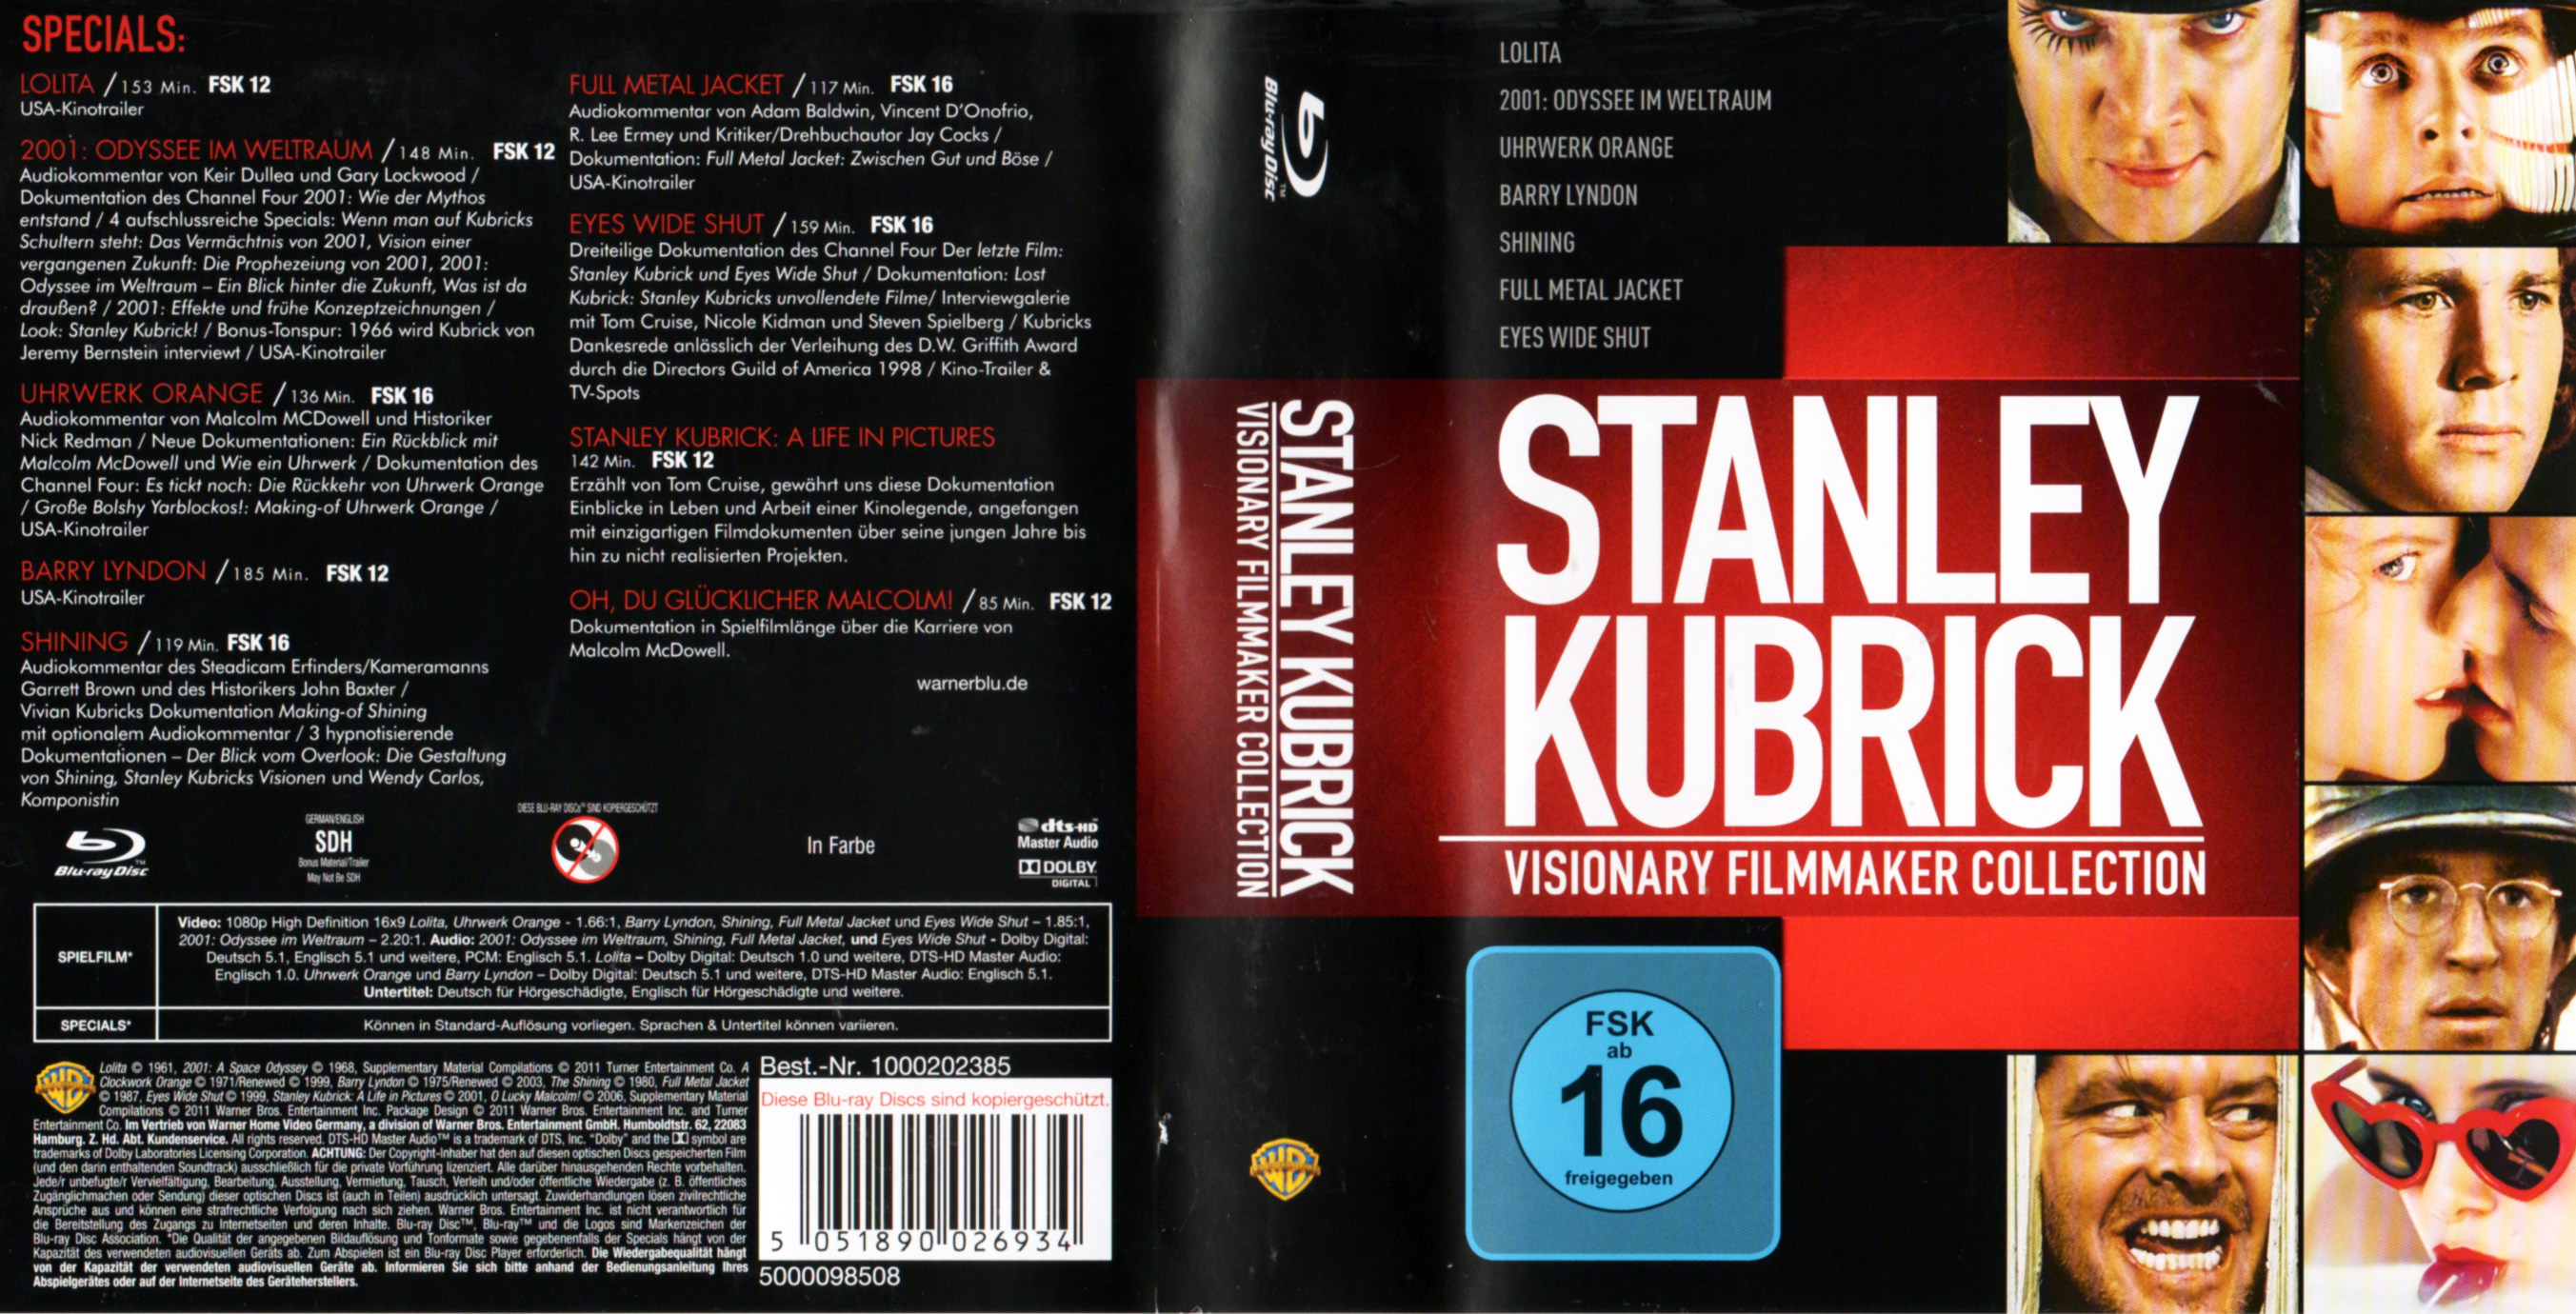 Jaquette DVD Stanley Kubrick visionary filmmaker collection Zone 1 (BLU-RAY)